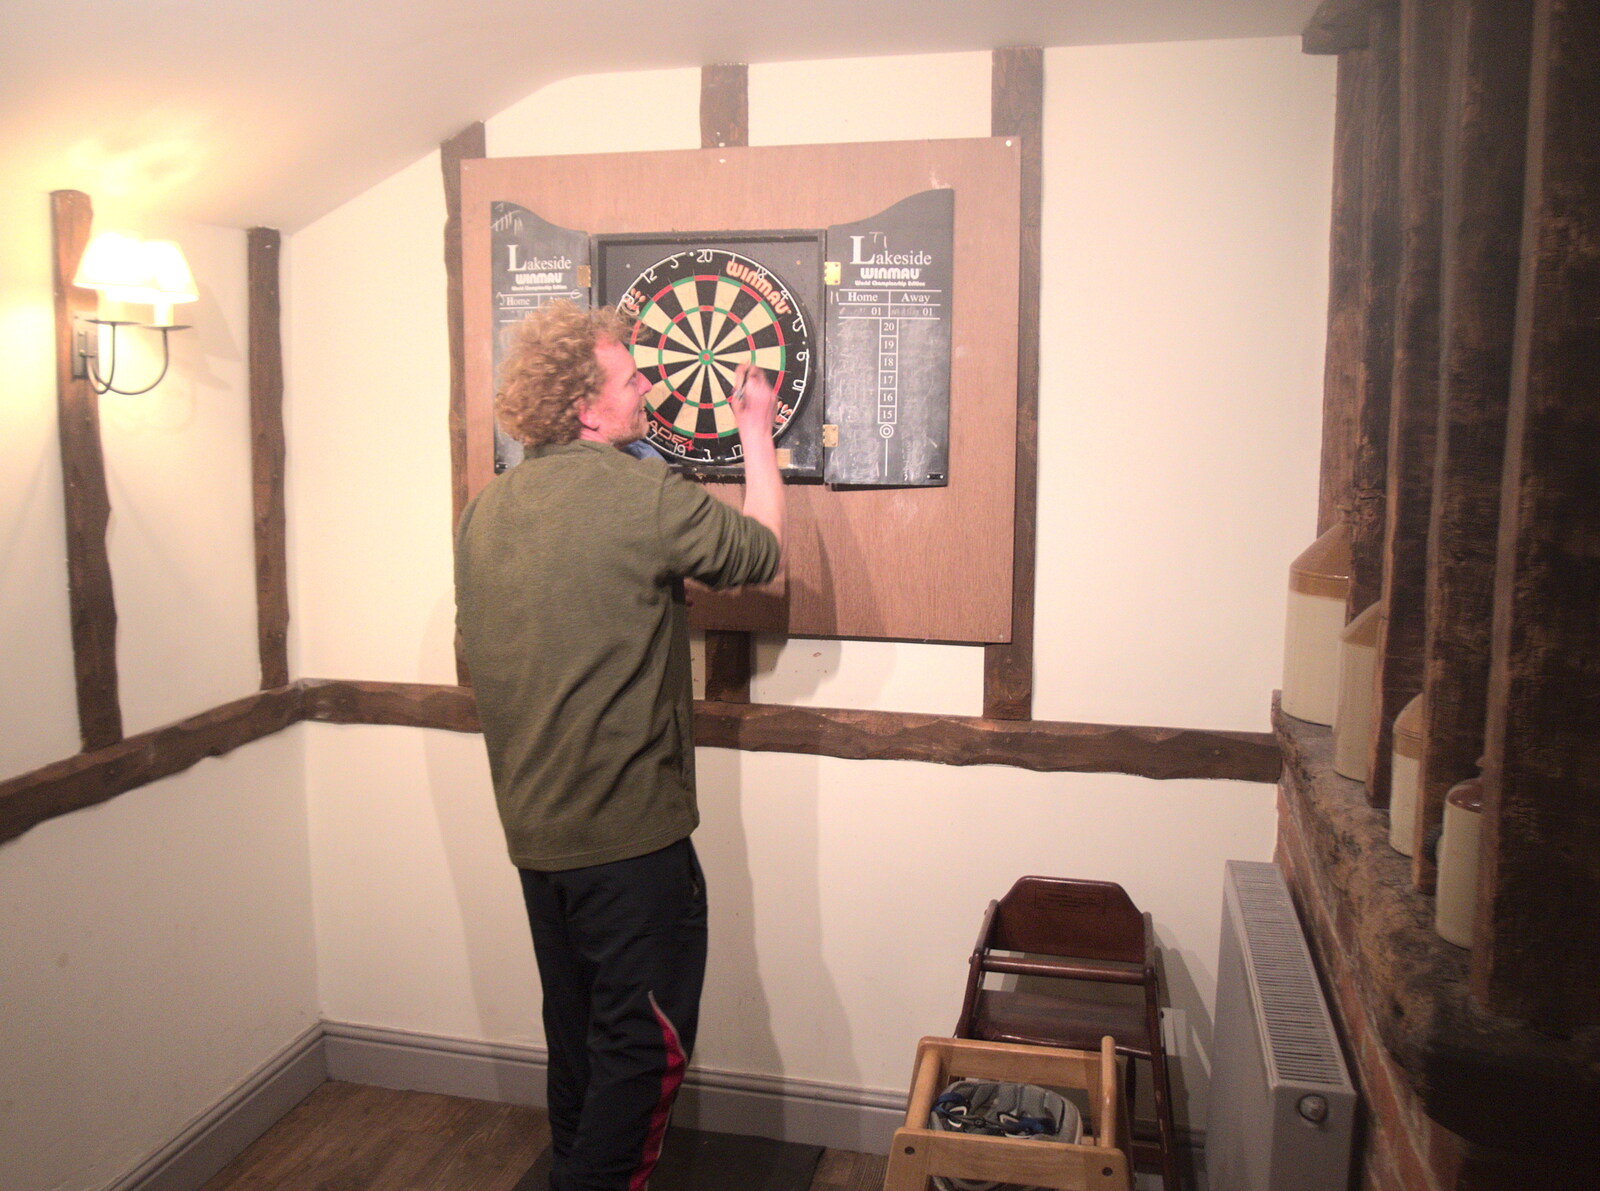 Wavy at the dartboard in the Beaky from Darts at the Beaky, and a Visit From Brussels, Occold and Thorndon, Suffolk - 9th April 2018